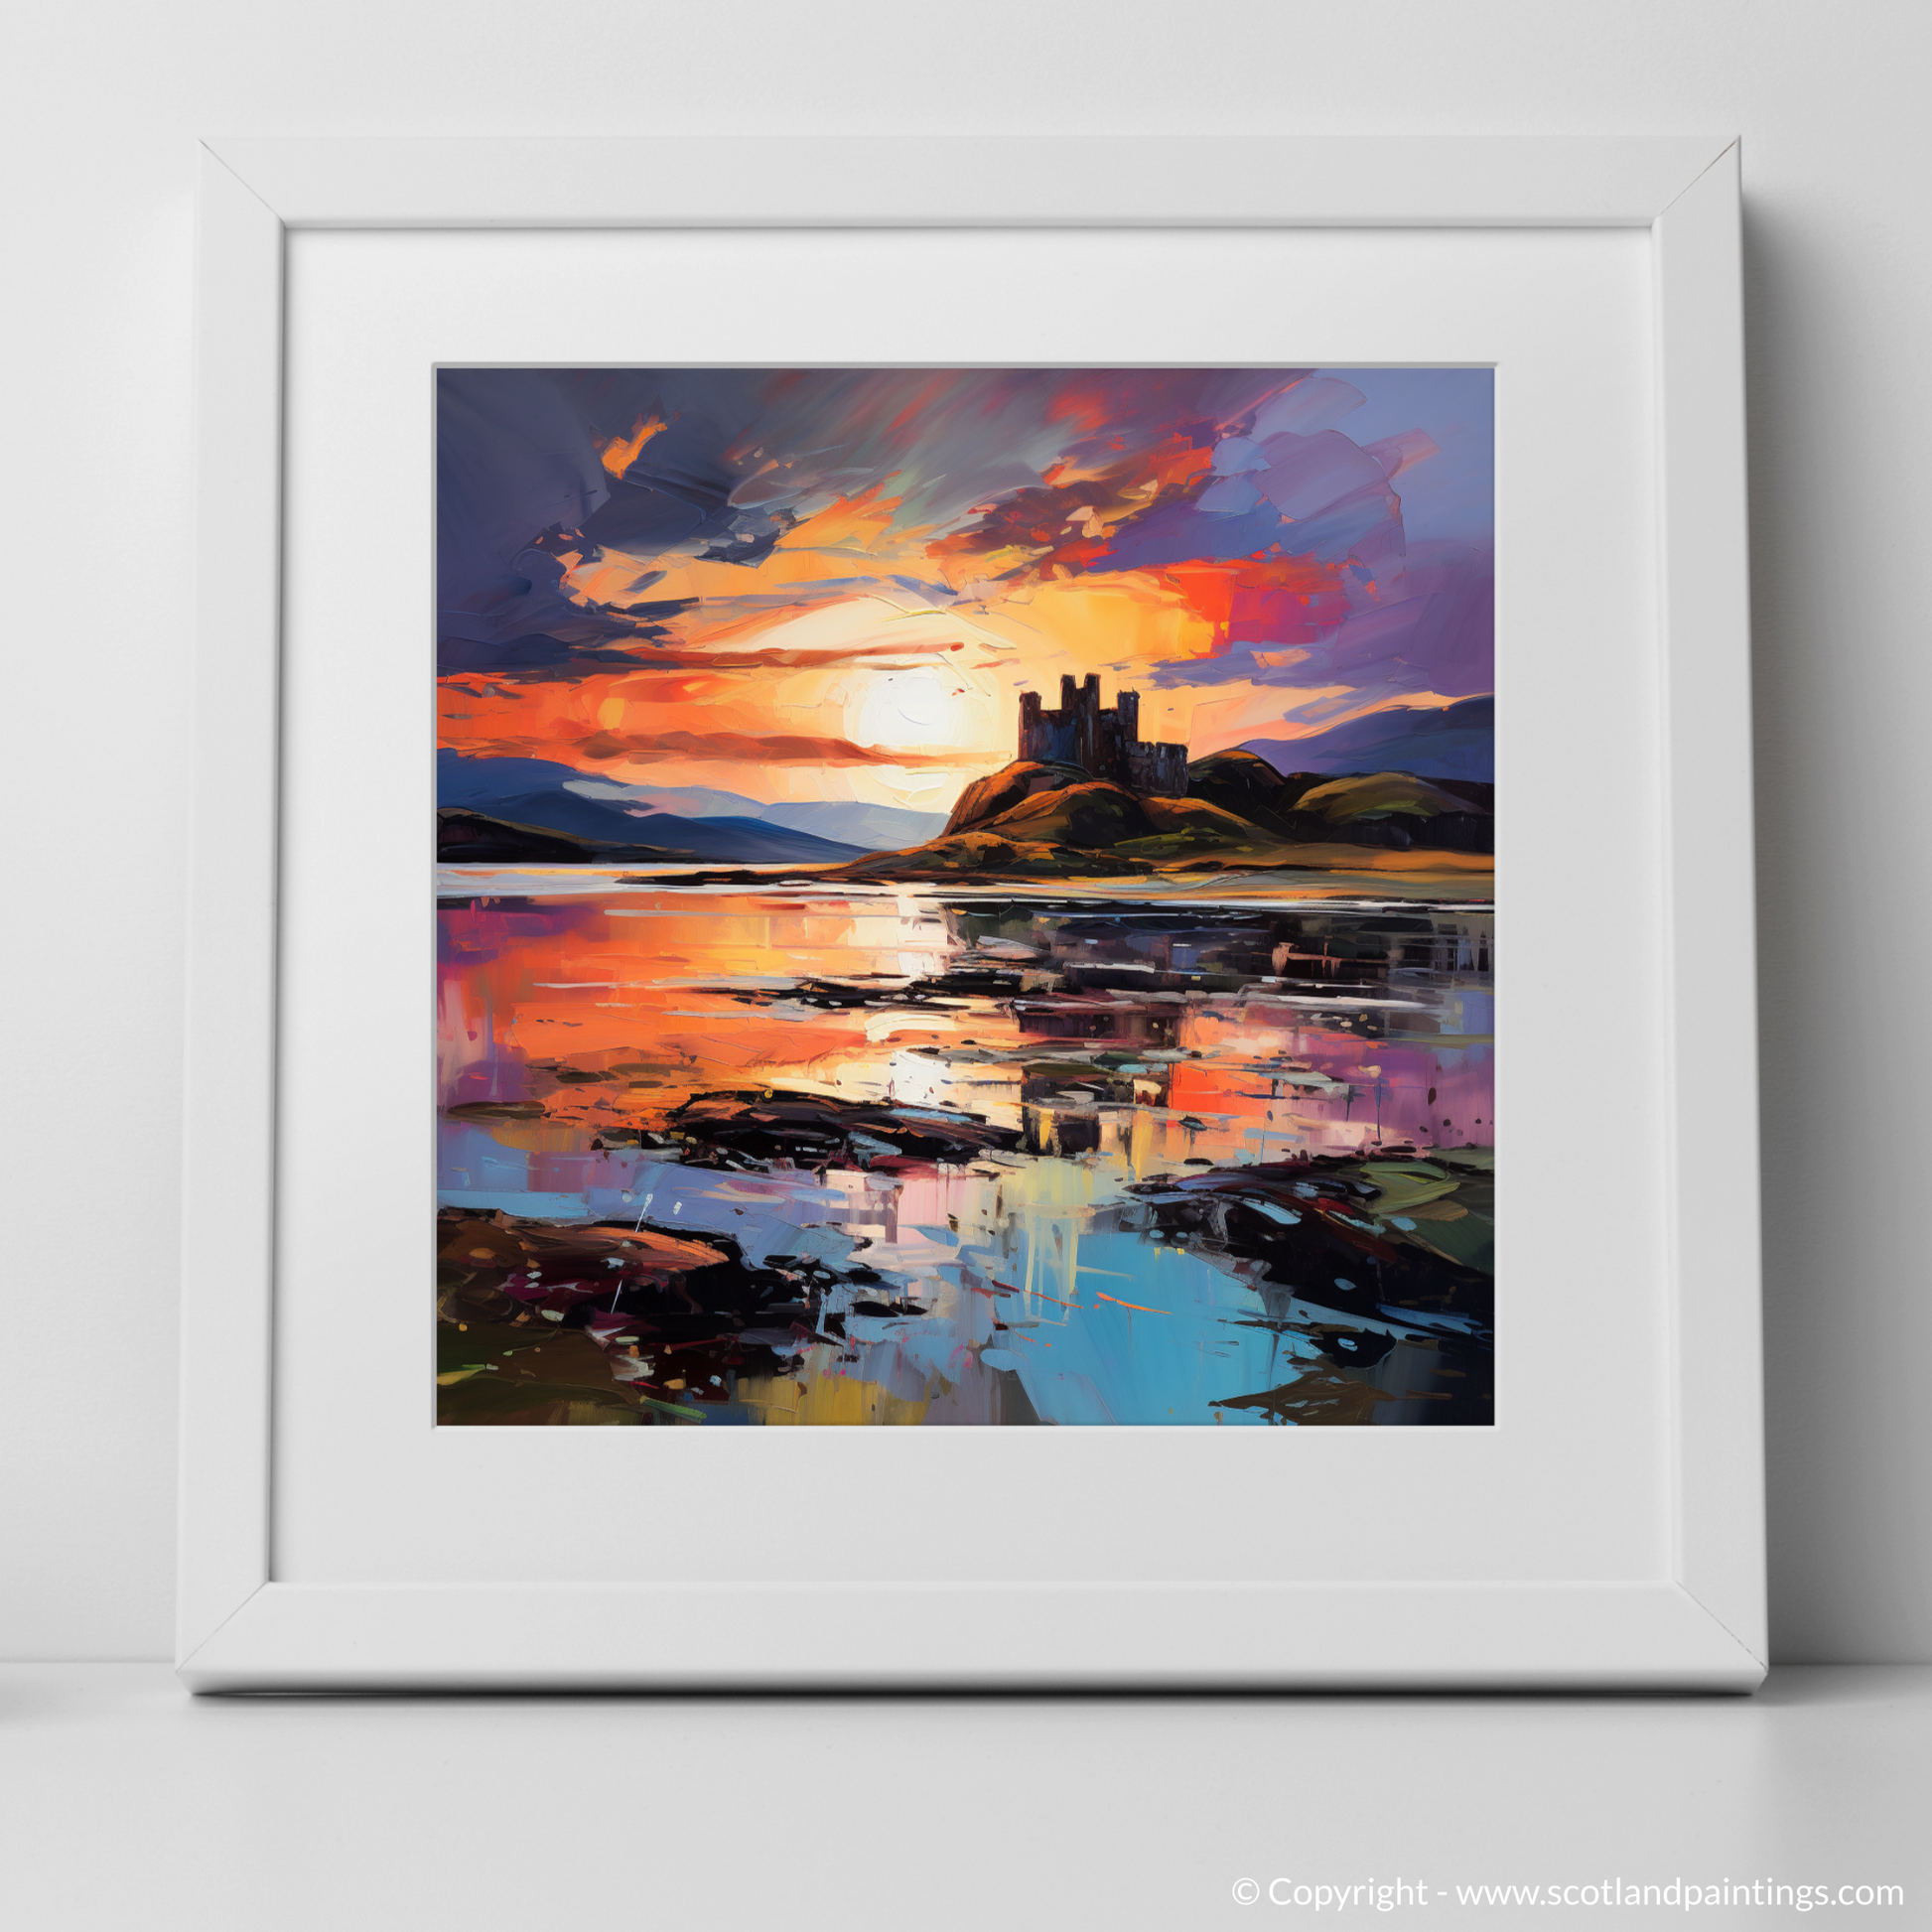 Art Print of Castle Stalker Bay at sunset with a white frame